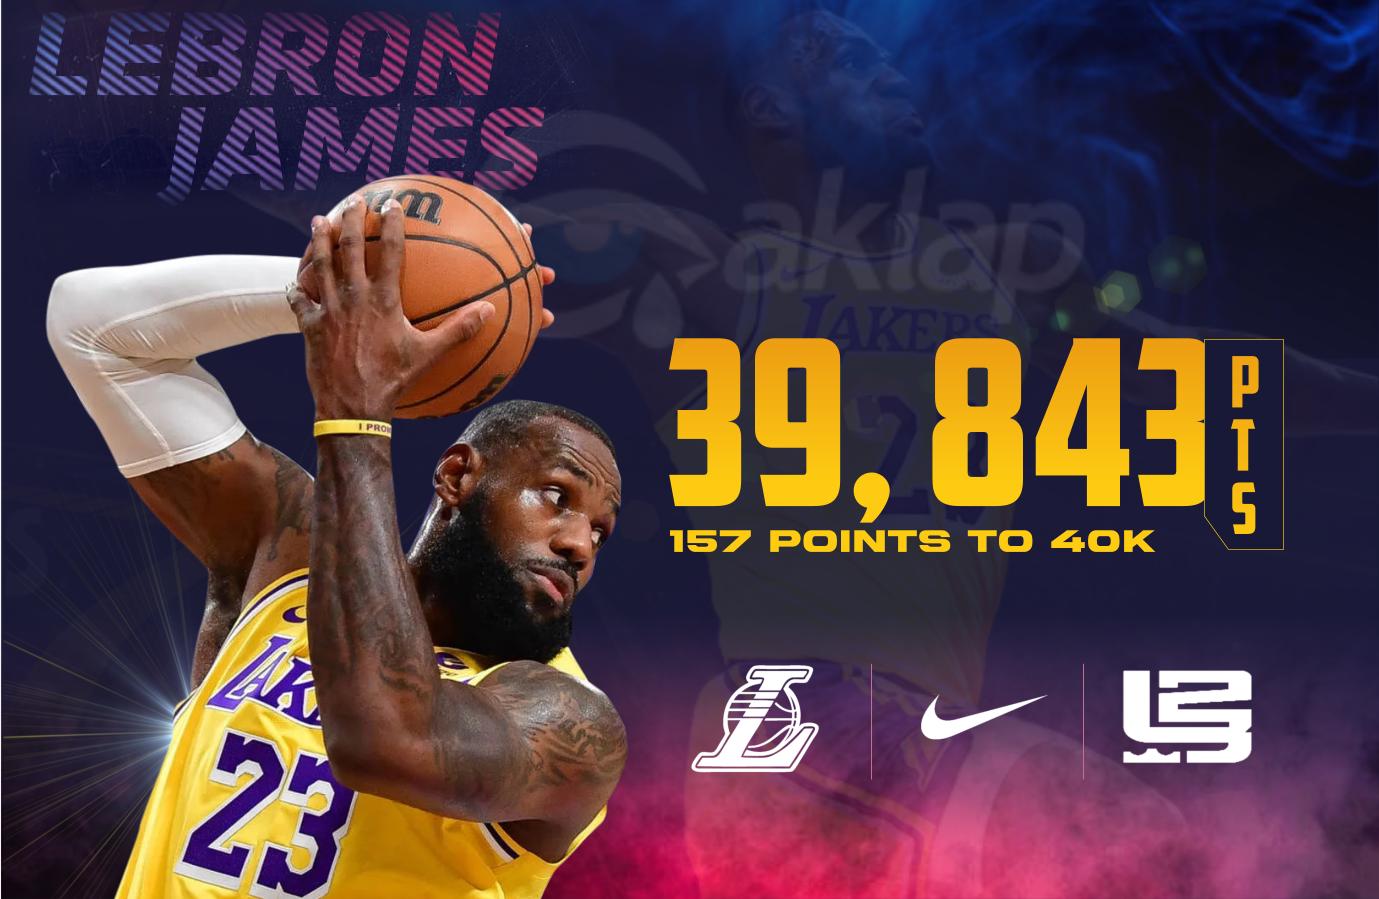 LeBron James is now 157 points away to 40,000 point-mark, Tracking LeBron James Path reaching 40,000 point-mark